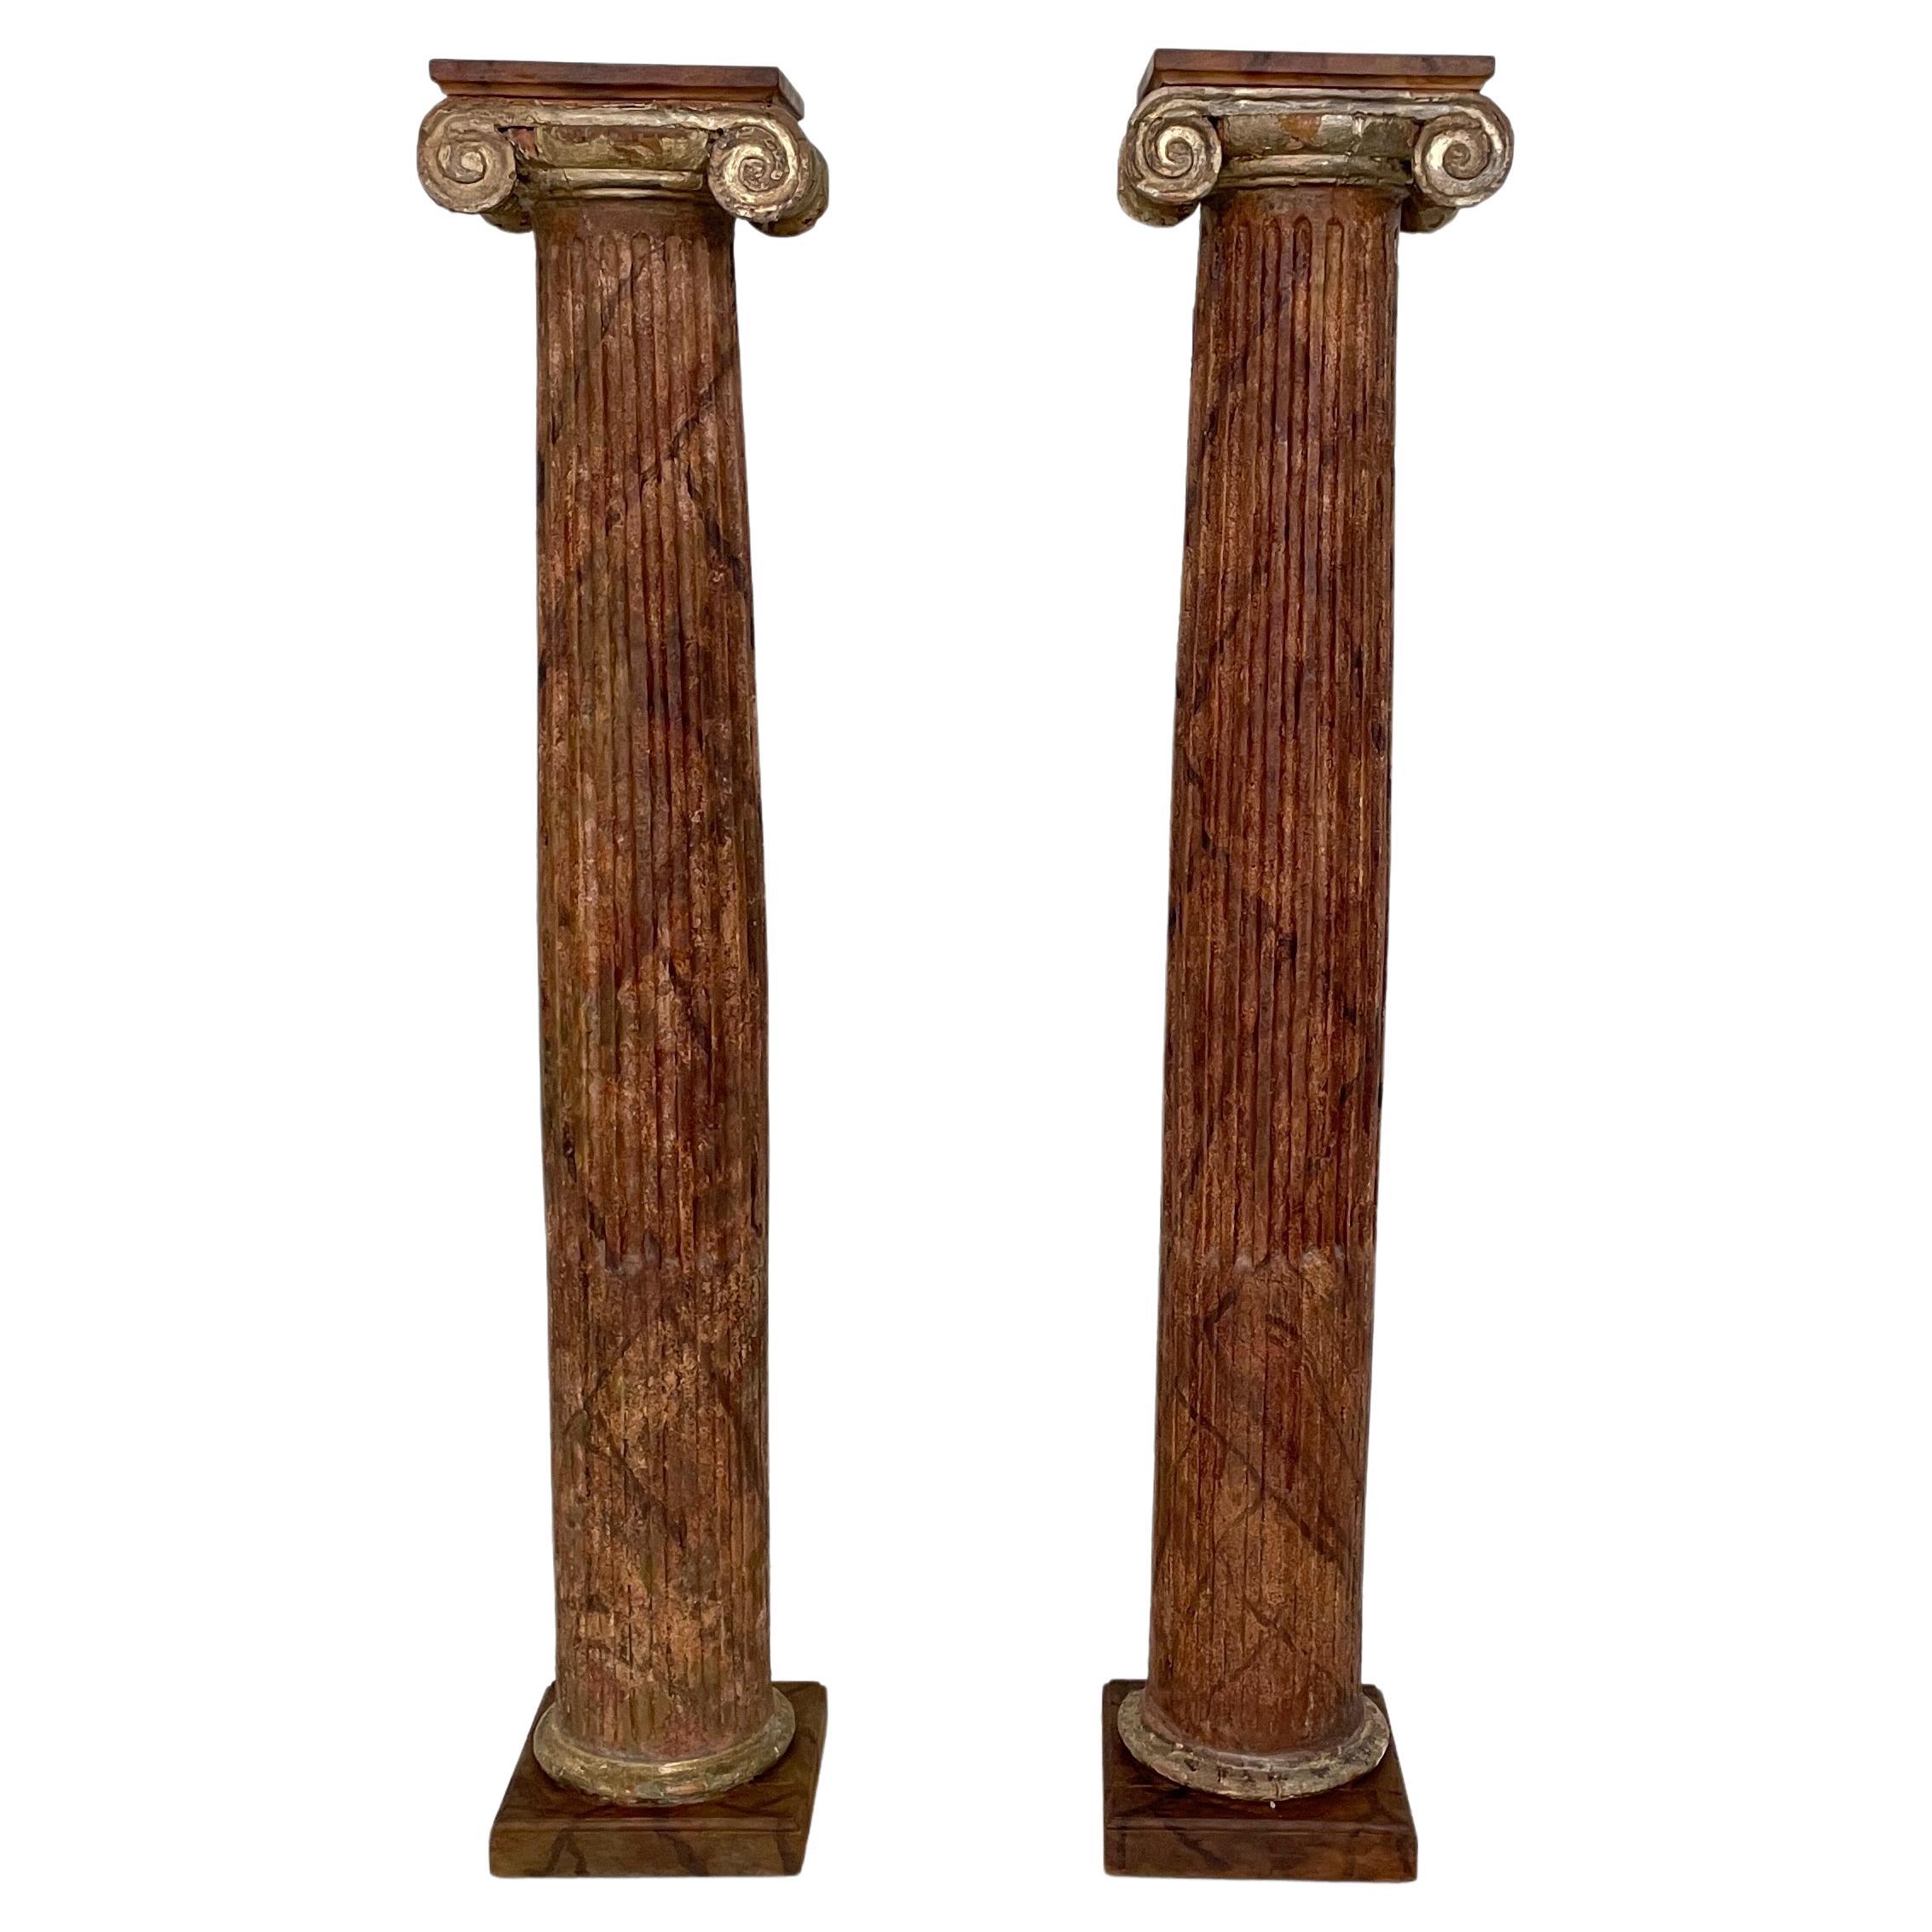 Early 19th Century Pair of Wood Columns Lacquered in Faux Marble, Around 1800 For Sale